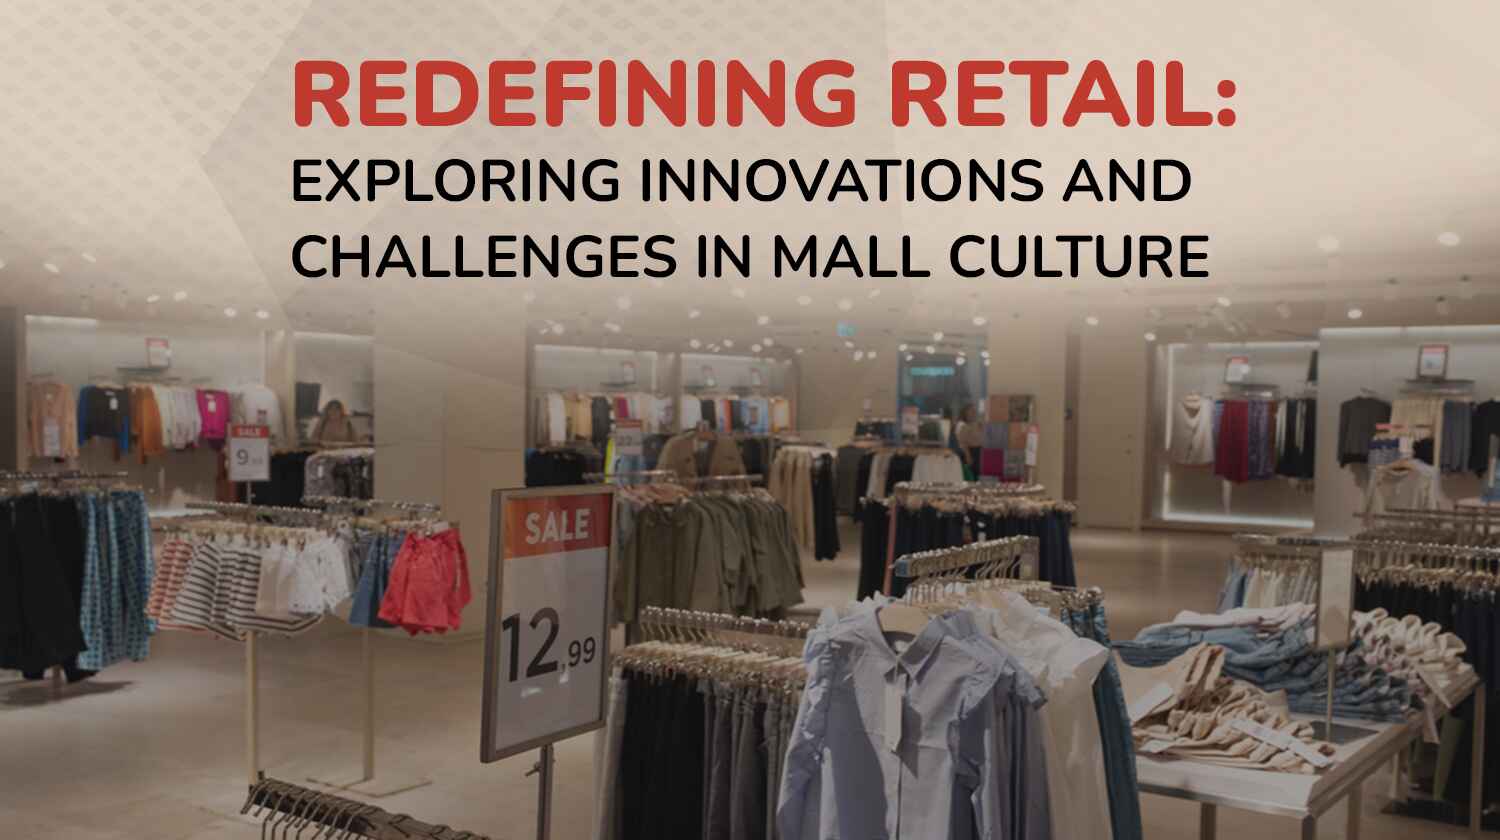 Redefining Retail: Exploring Innovations and Challenges in Mall Culture